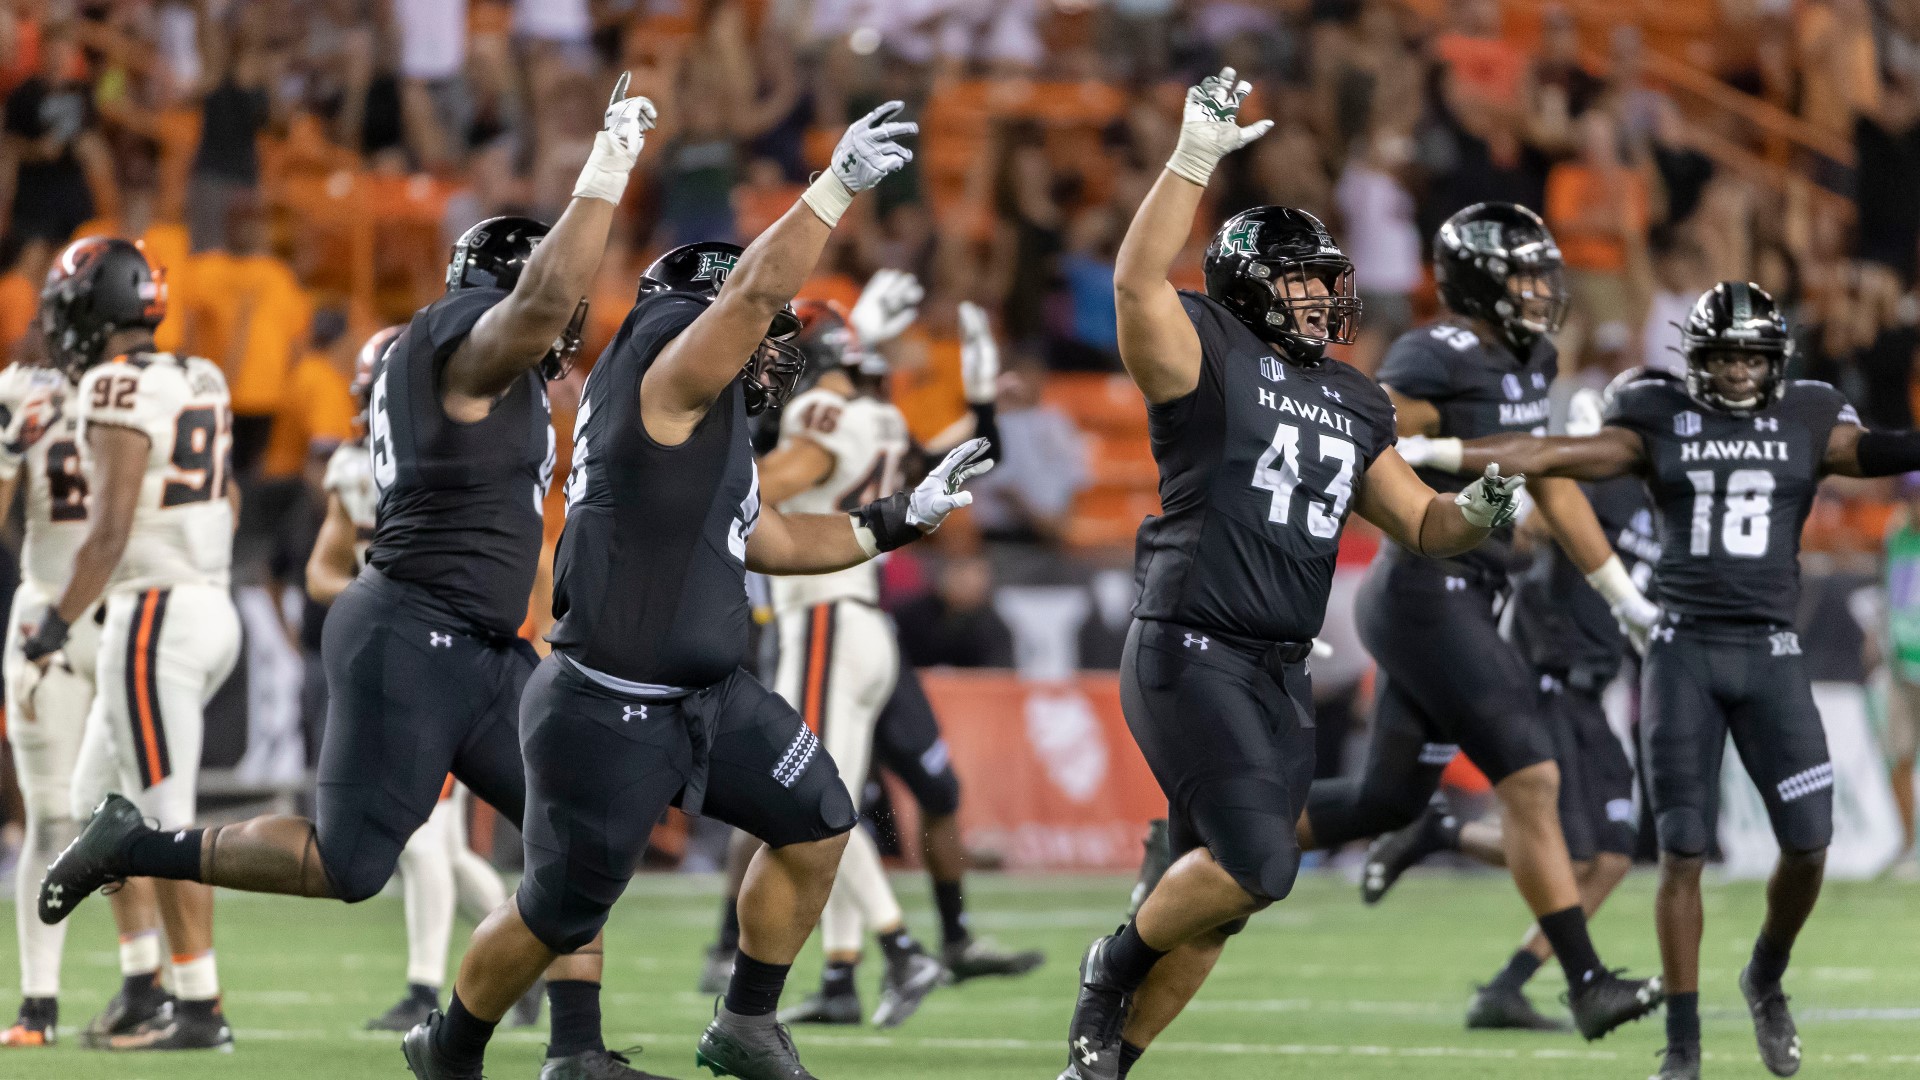 Hawaii beat Oregon State by three points. It's rare for a Mountain West team to beat a Pac-12 team. So how did they do it?